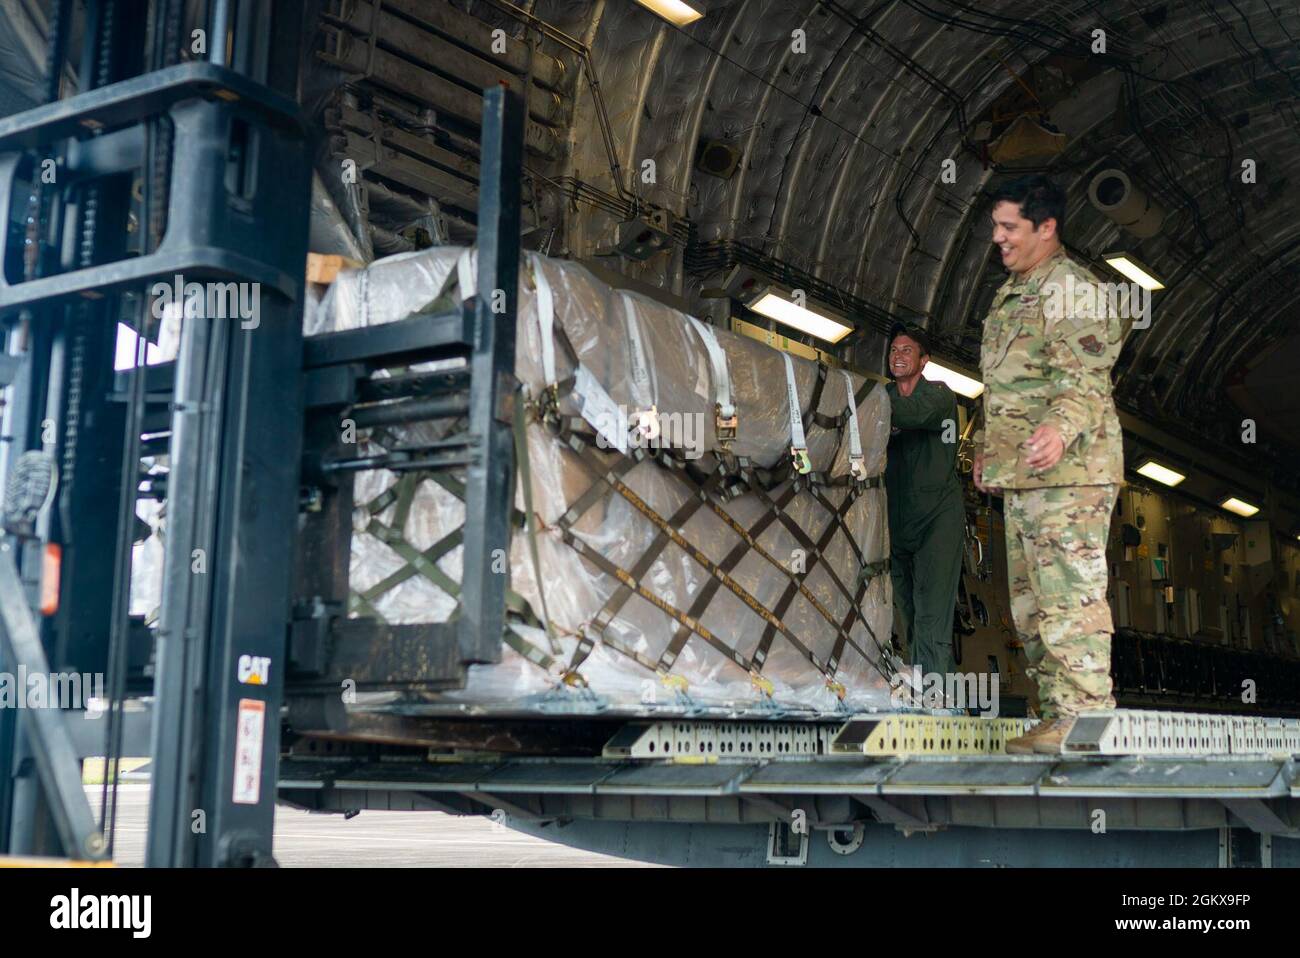 U.S. Air Force Maj. Noah Davis, C-17 Globemaster III aircraft commander, and Staff Sgt. Dwayne Baldwin, loadmaster, both assigned to the 701st Airlift Squadron, push cargo onto a forklift at Johan Adolf Pengel International Airport, Suriname, July 16, 2021. The portable field hospital, valued at $745,000, was donated by U.S. Southern Command Stock Photo